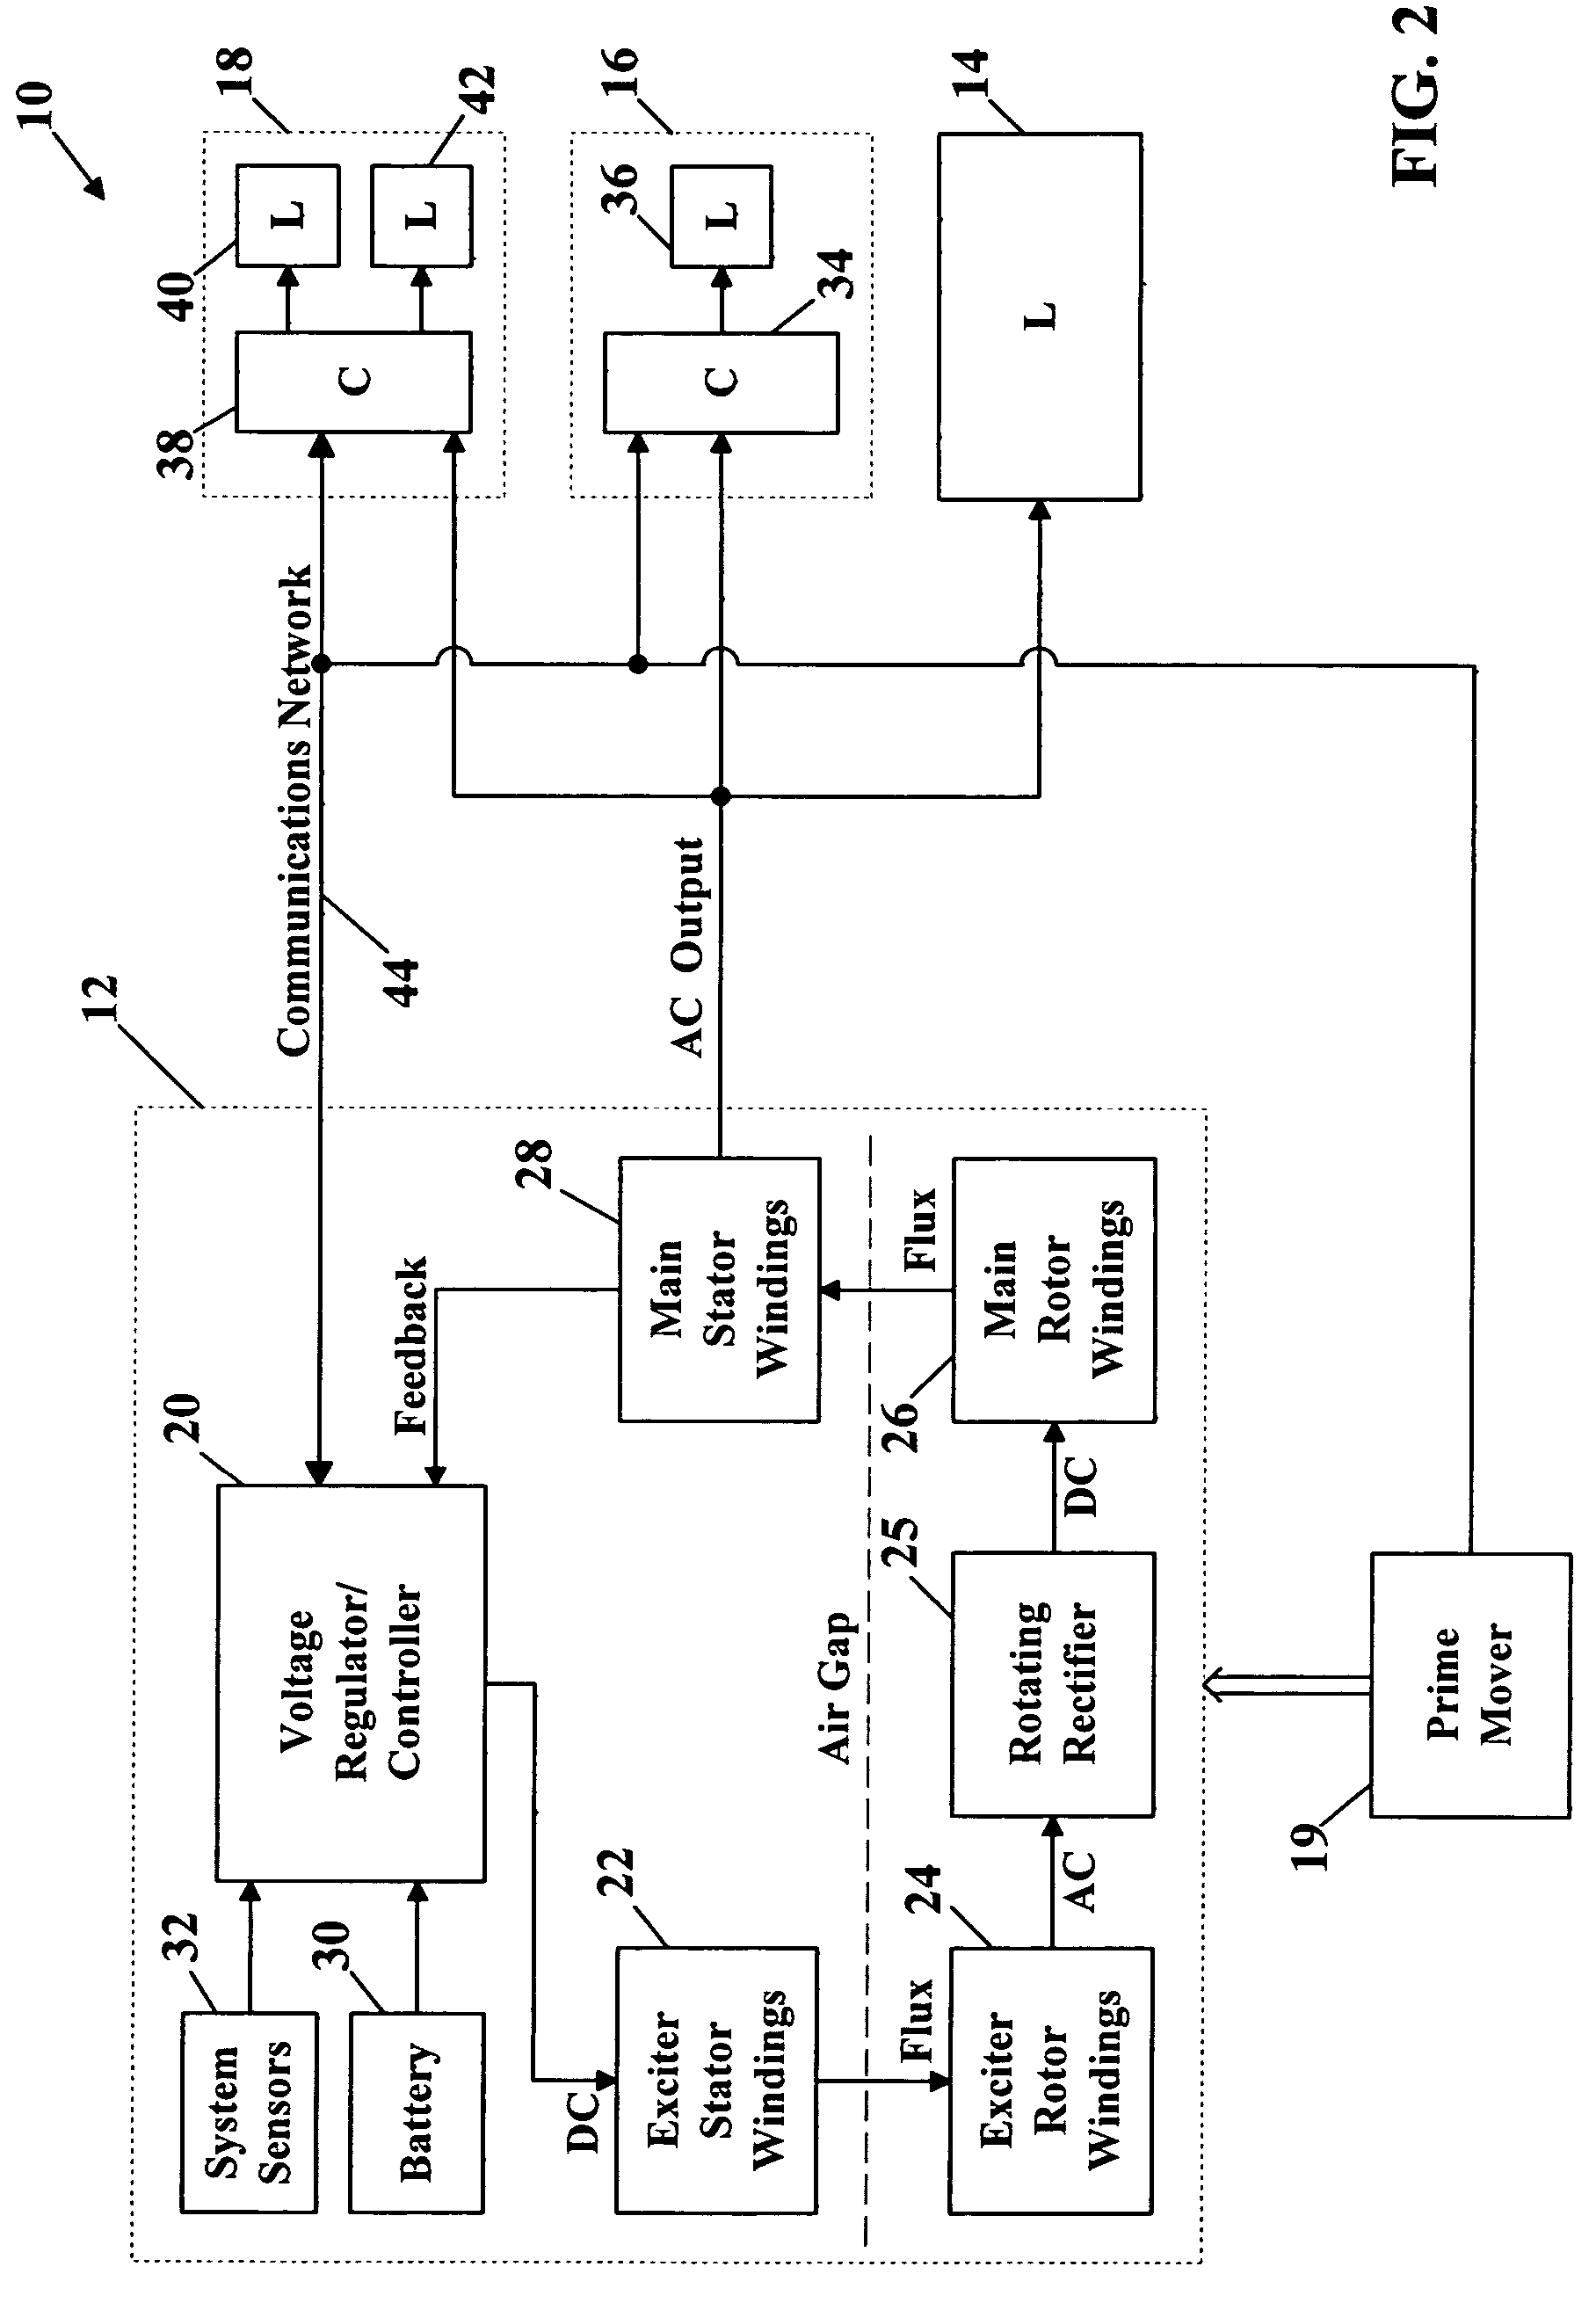 Power manager for an electrical power generator